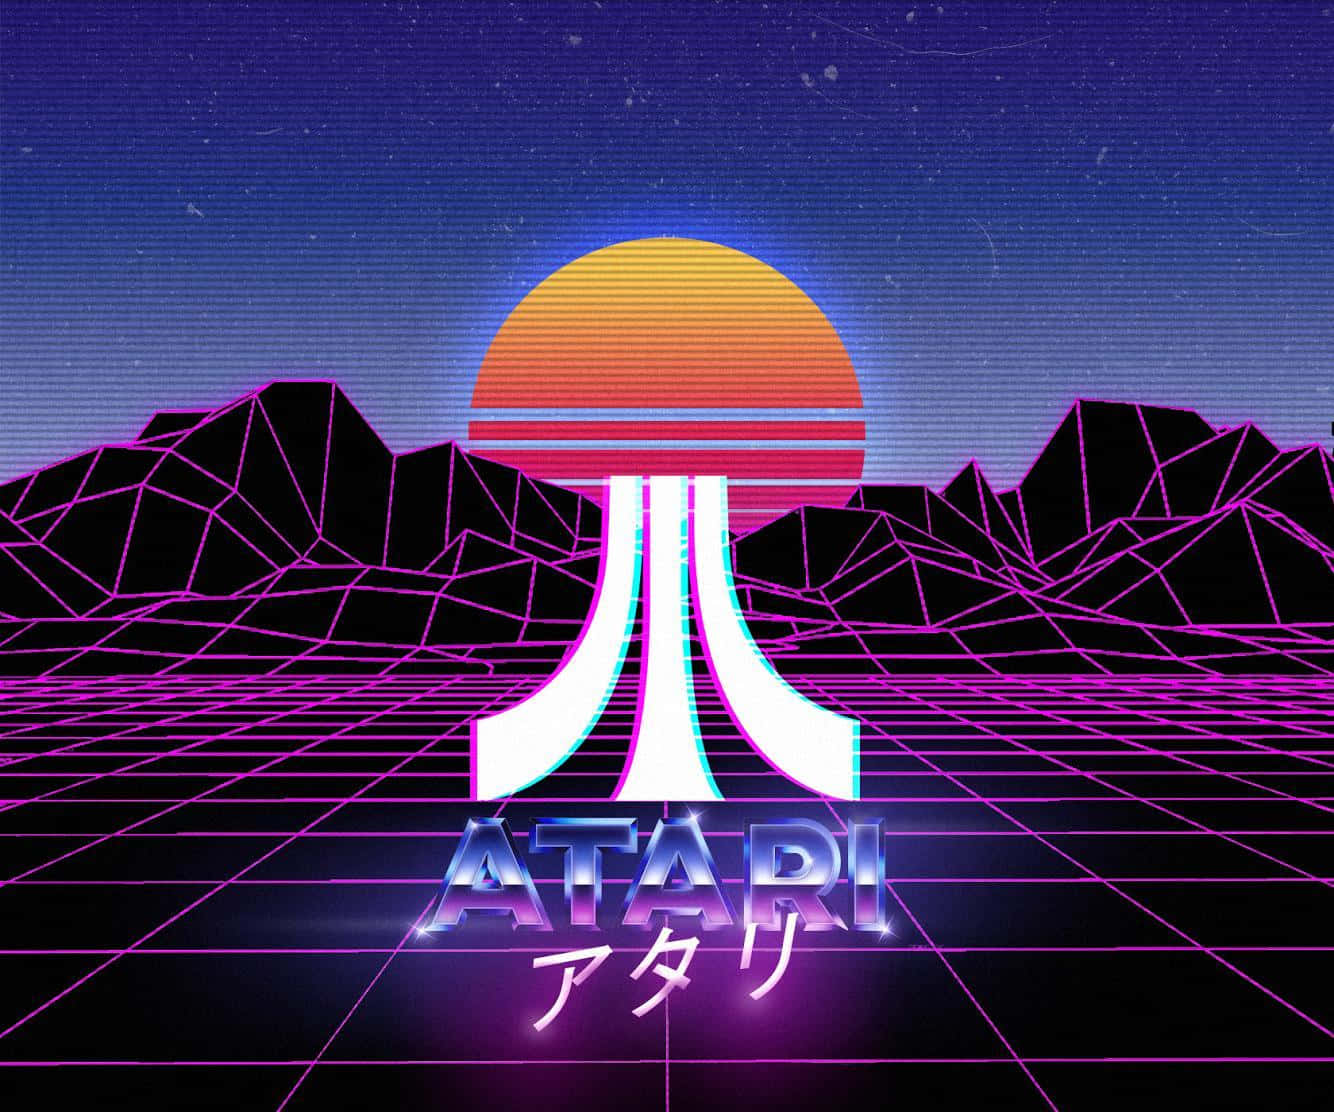 Dance your way into the night with Retrowave.